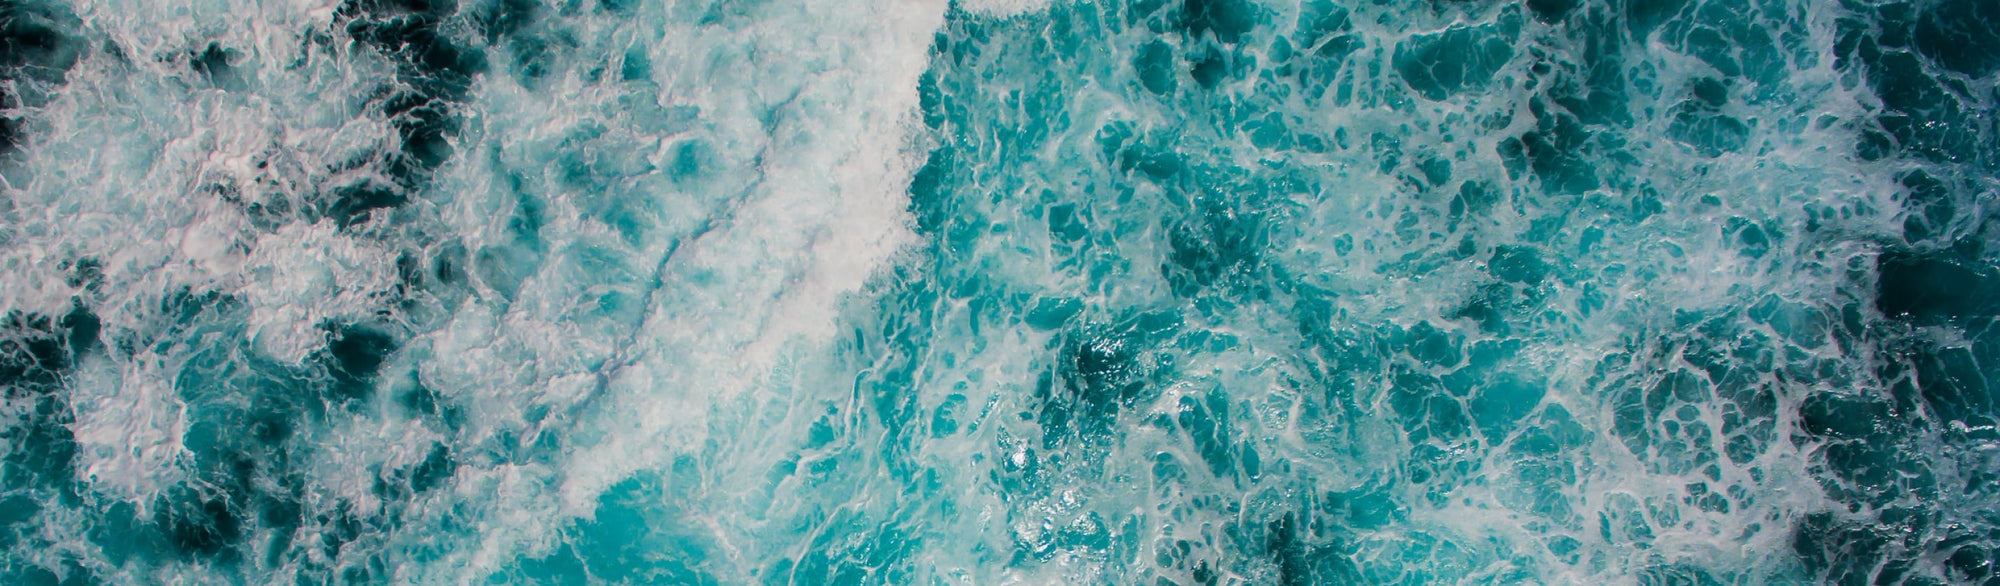 A photograph of water taken from above with shades of blue and white wave details